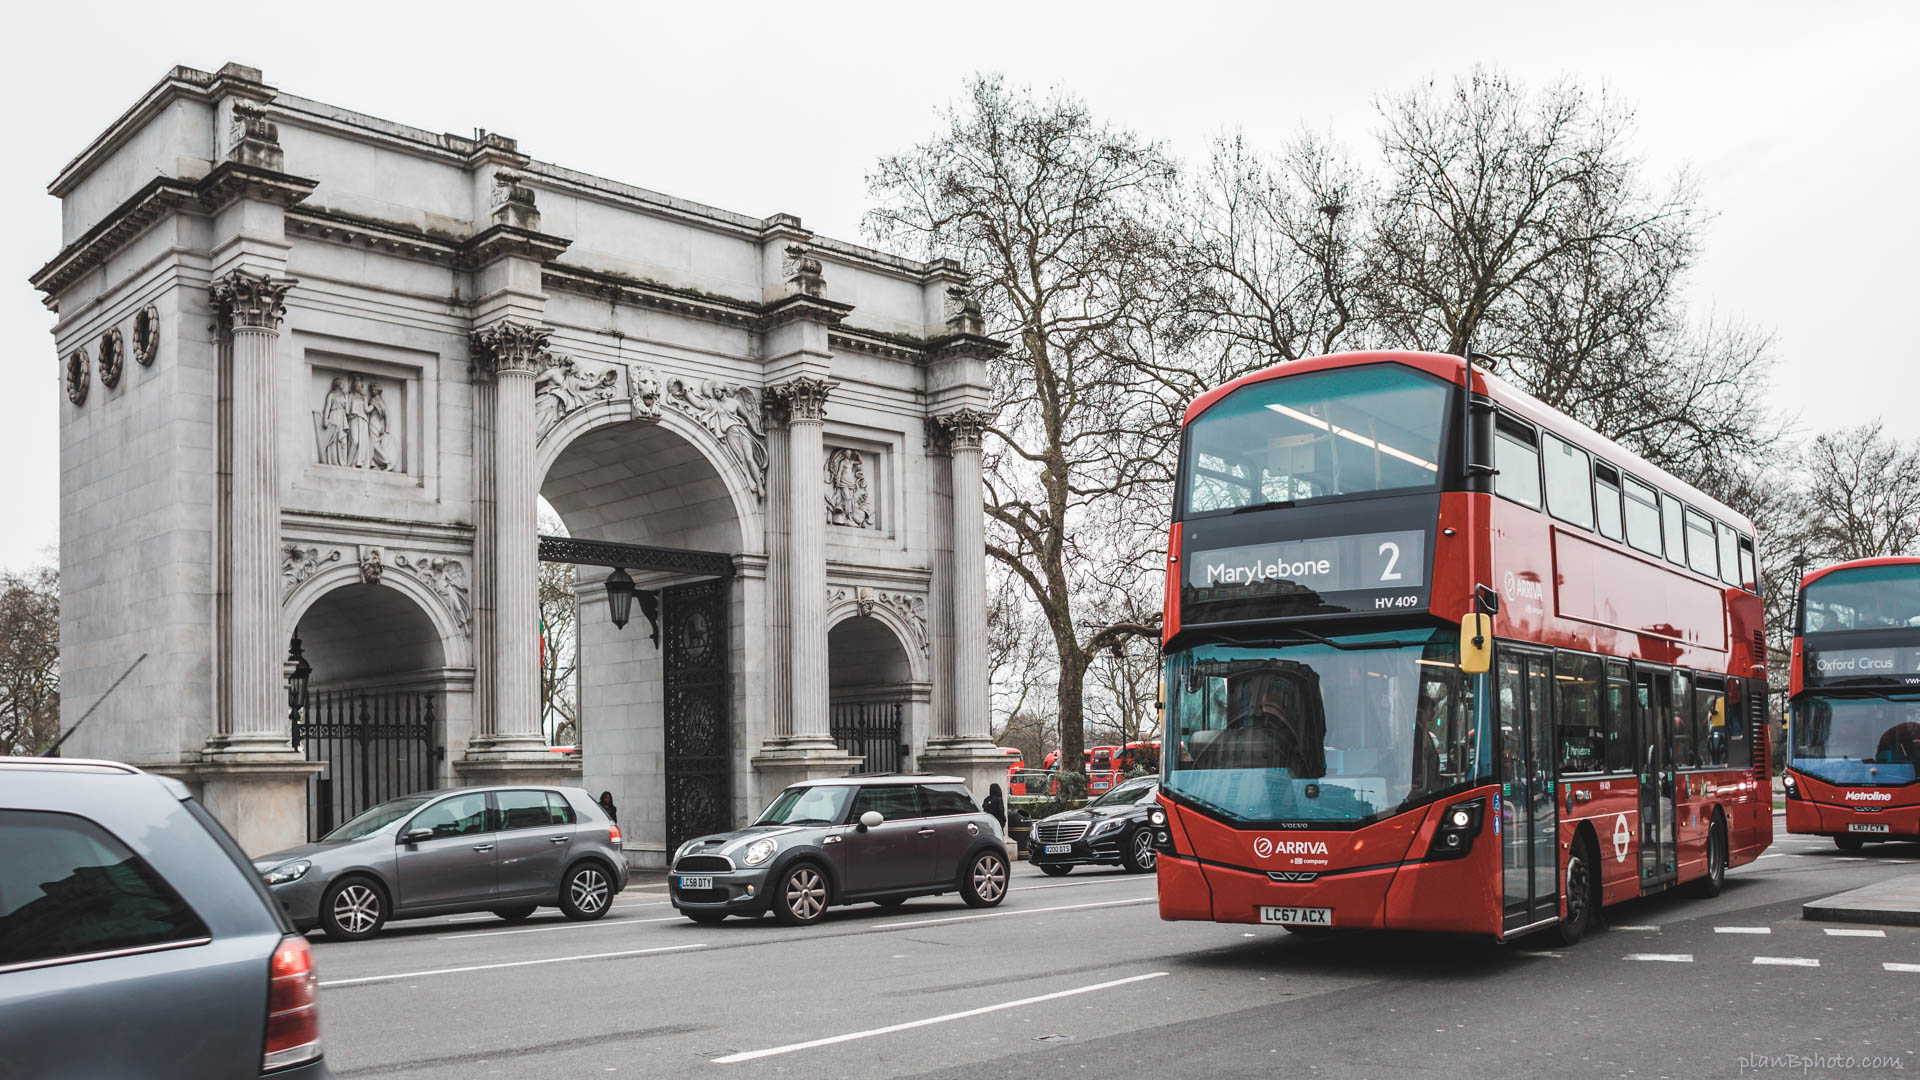 free image of the Marble arch in London with red double-decker bus